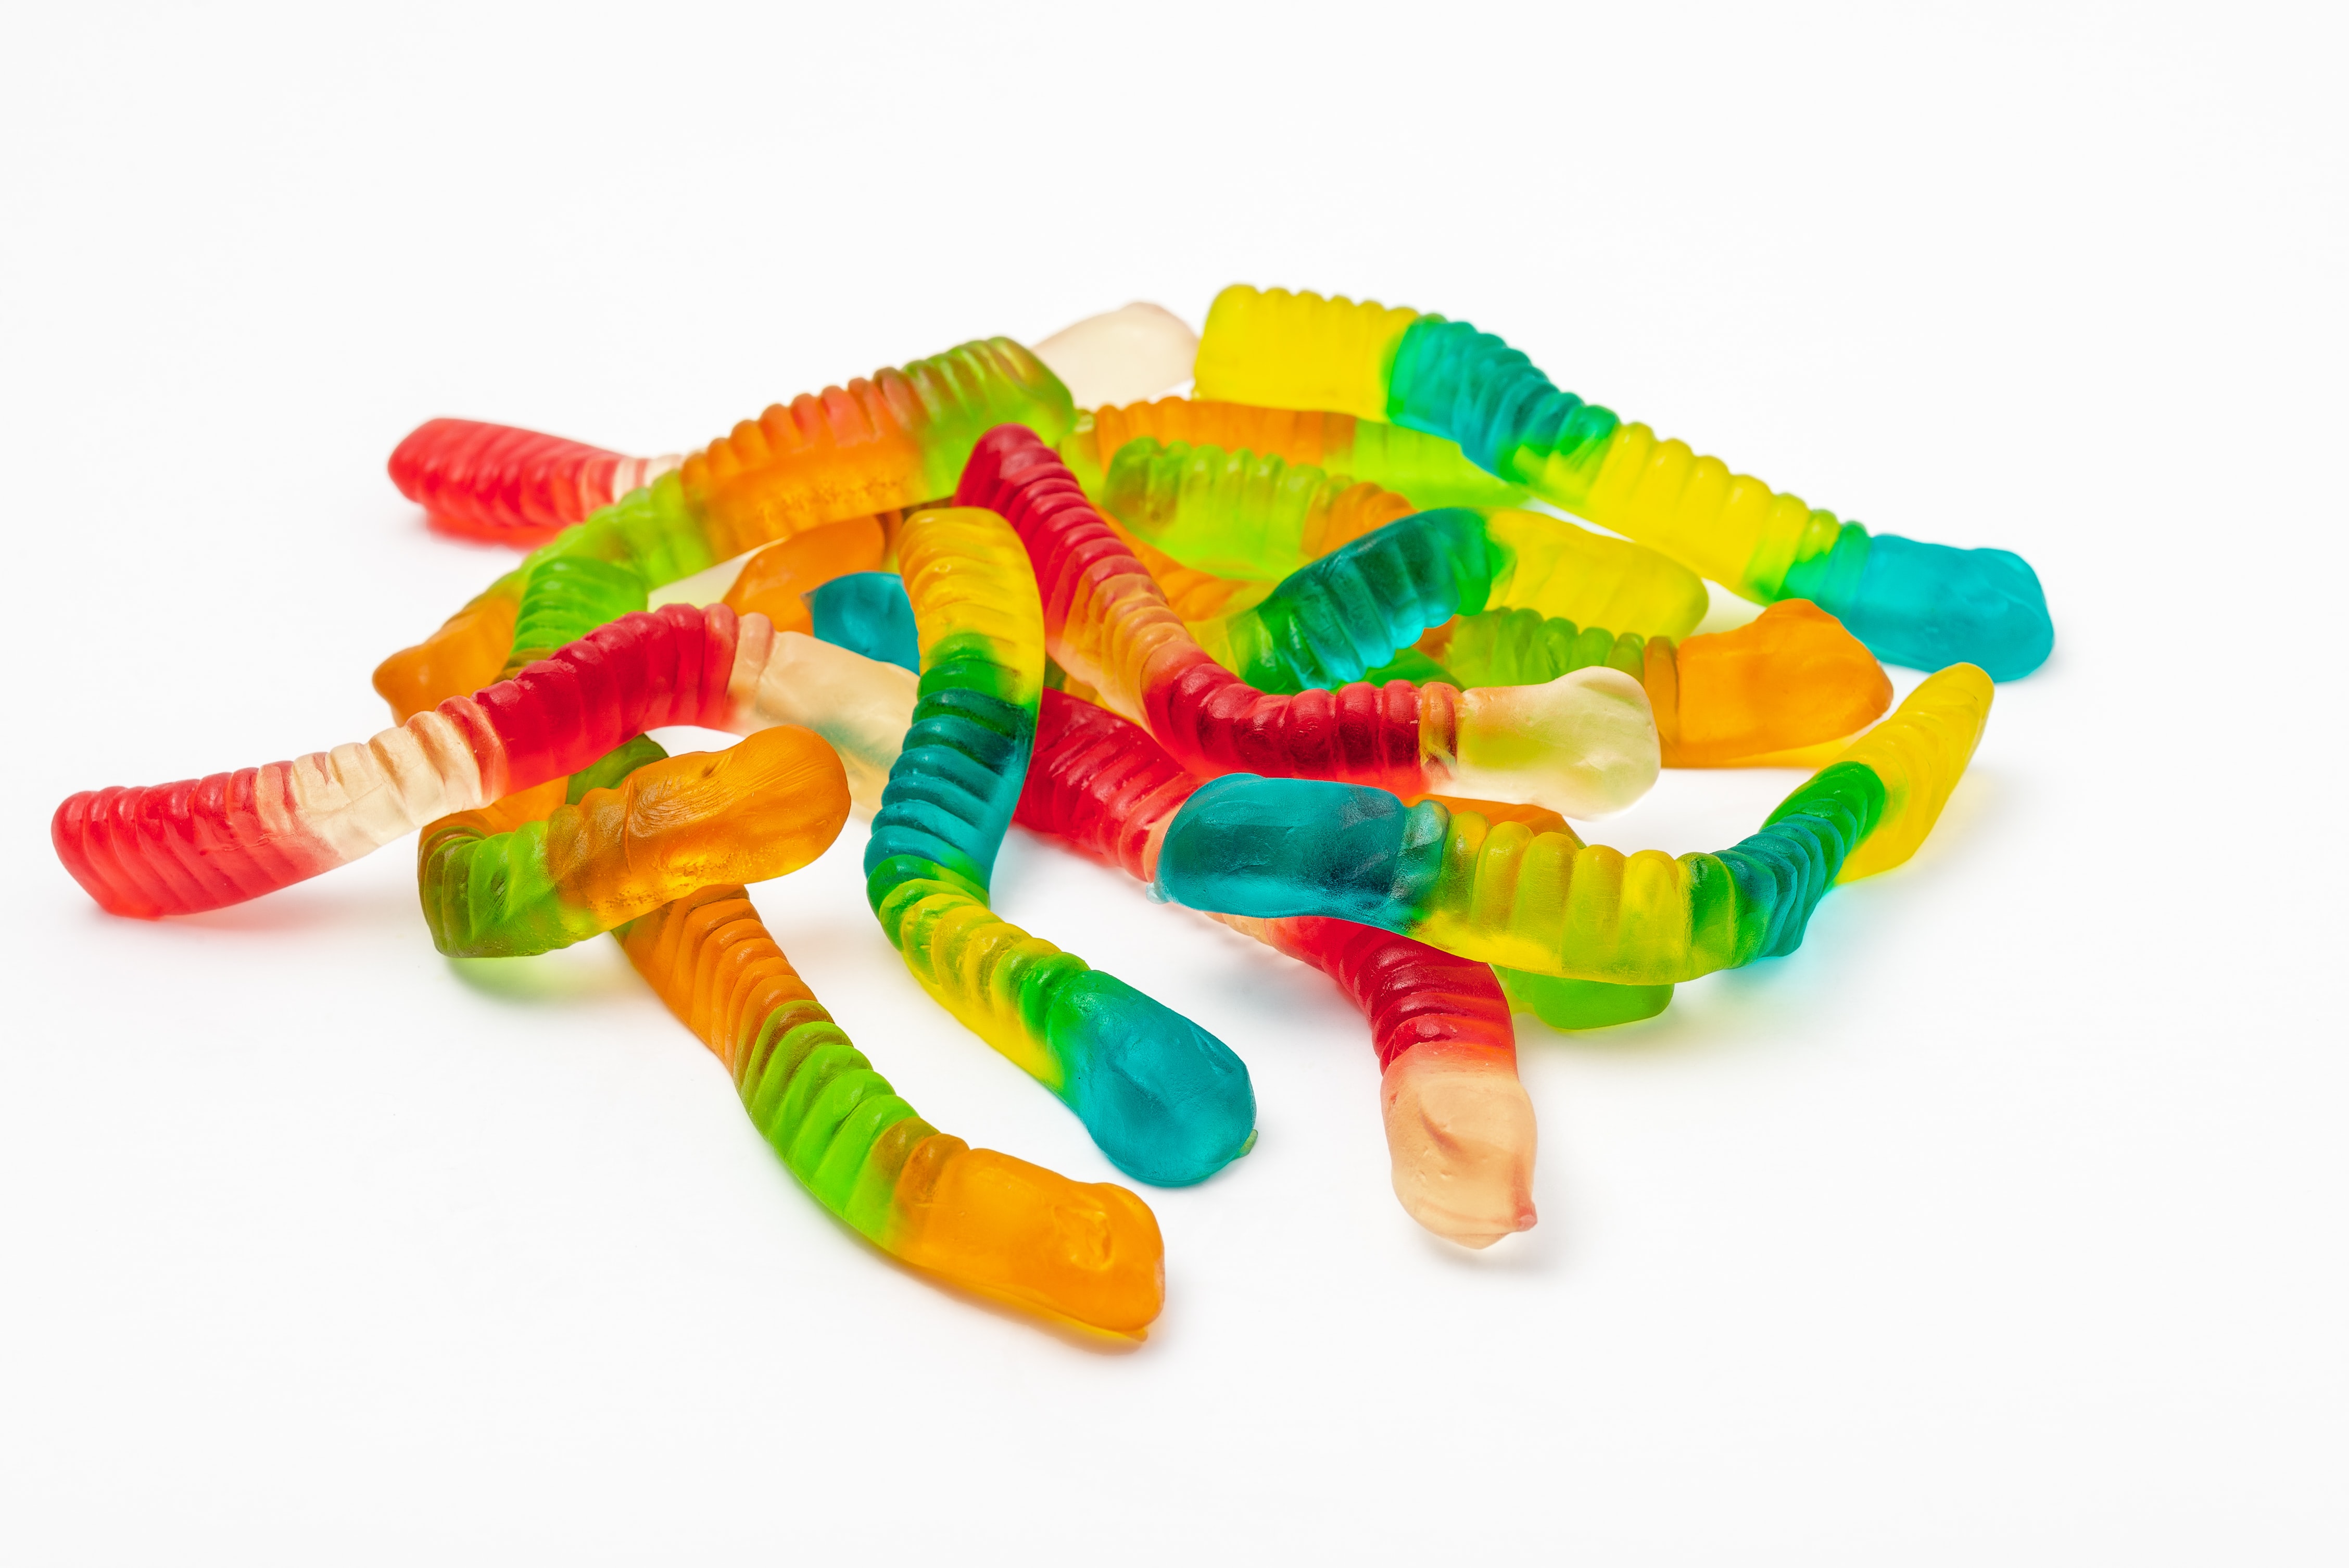 Pile of gummy worms